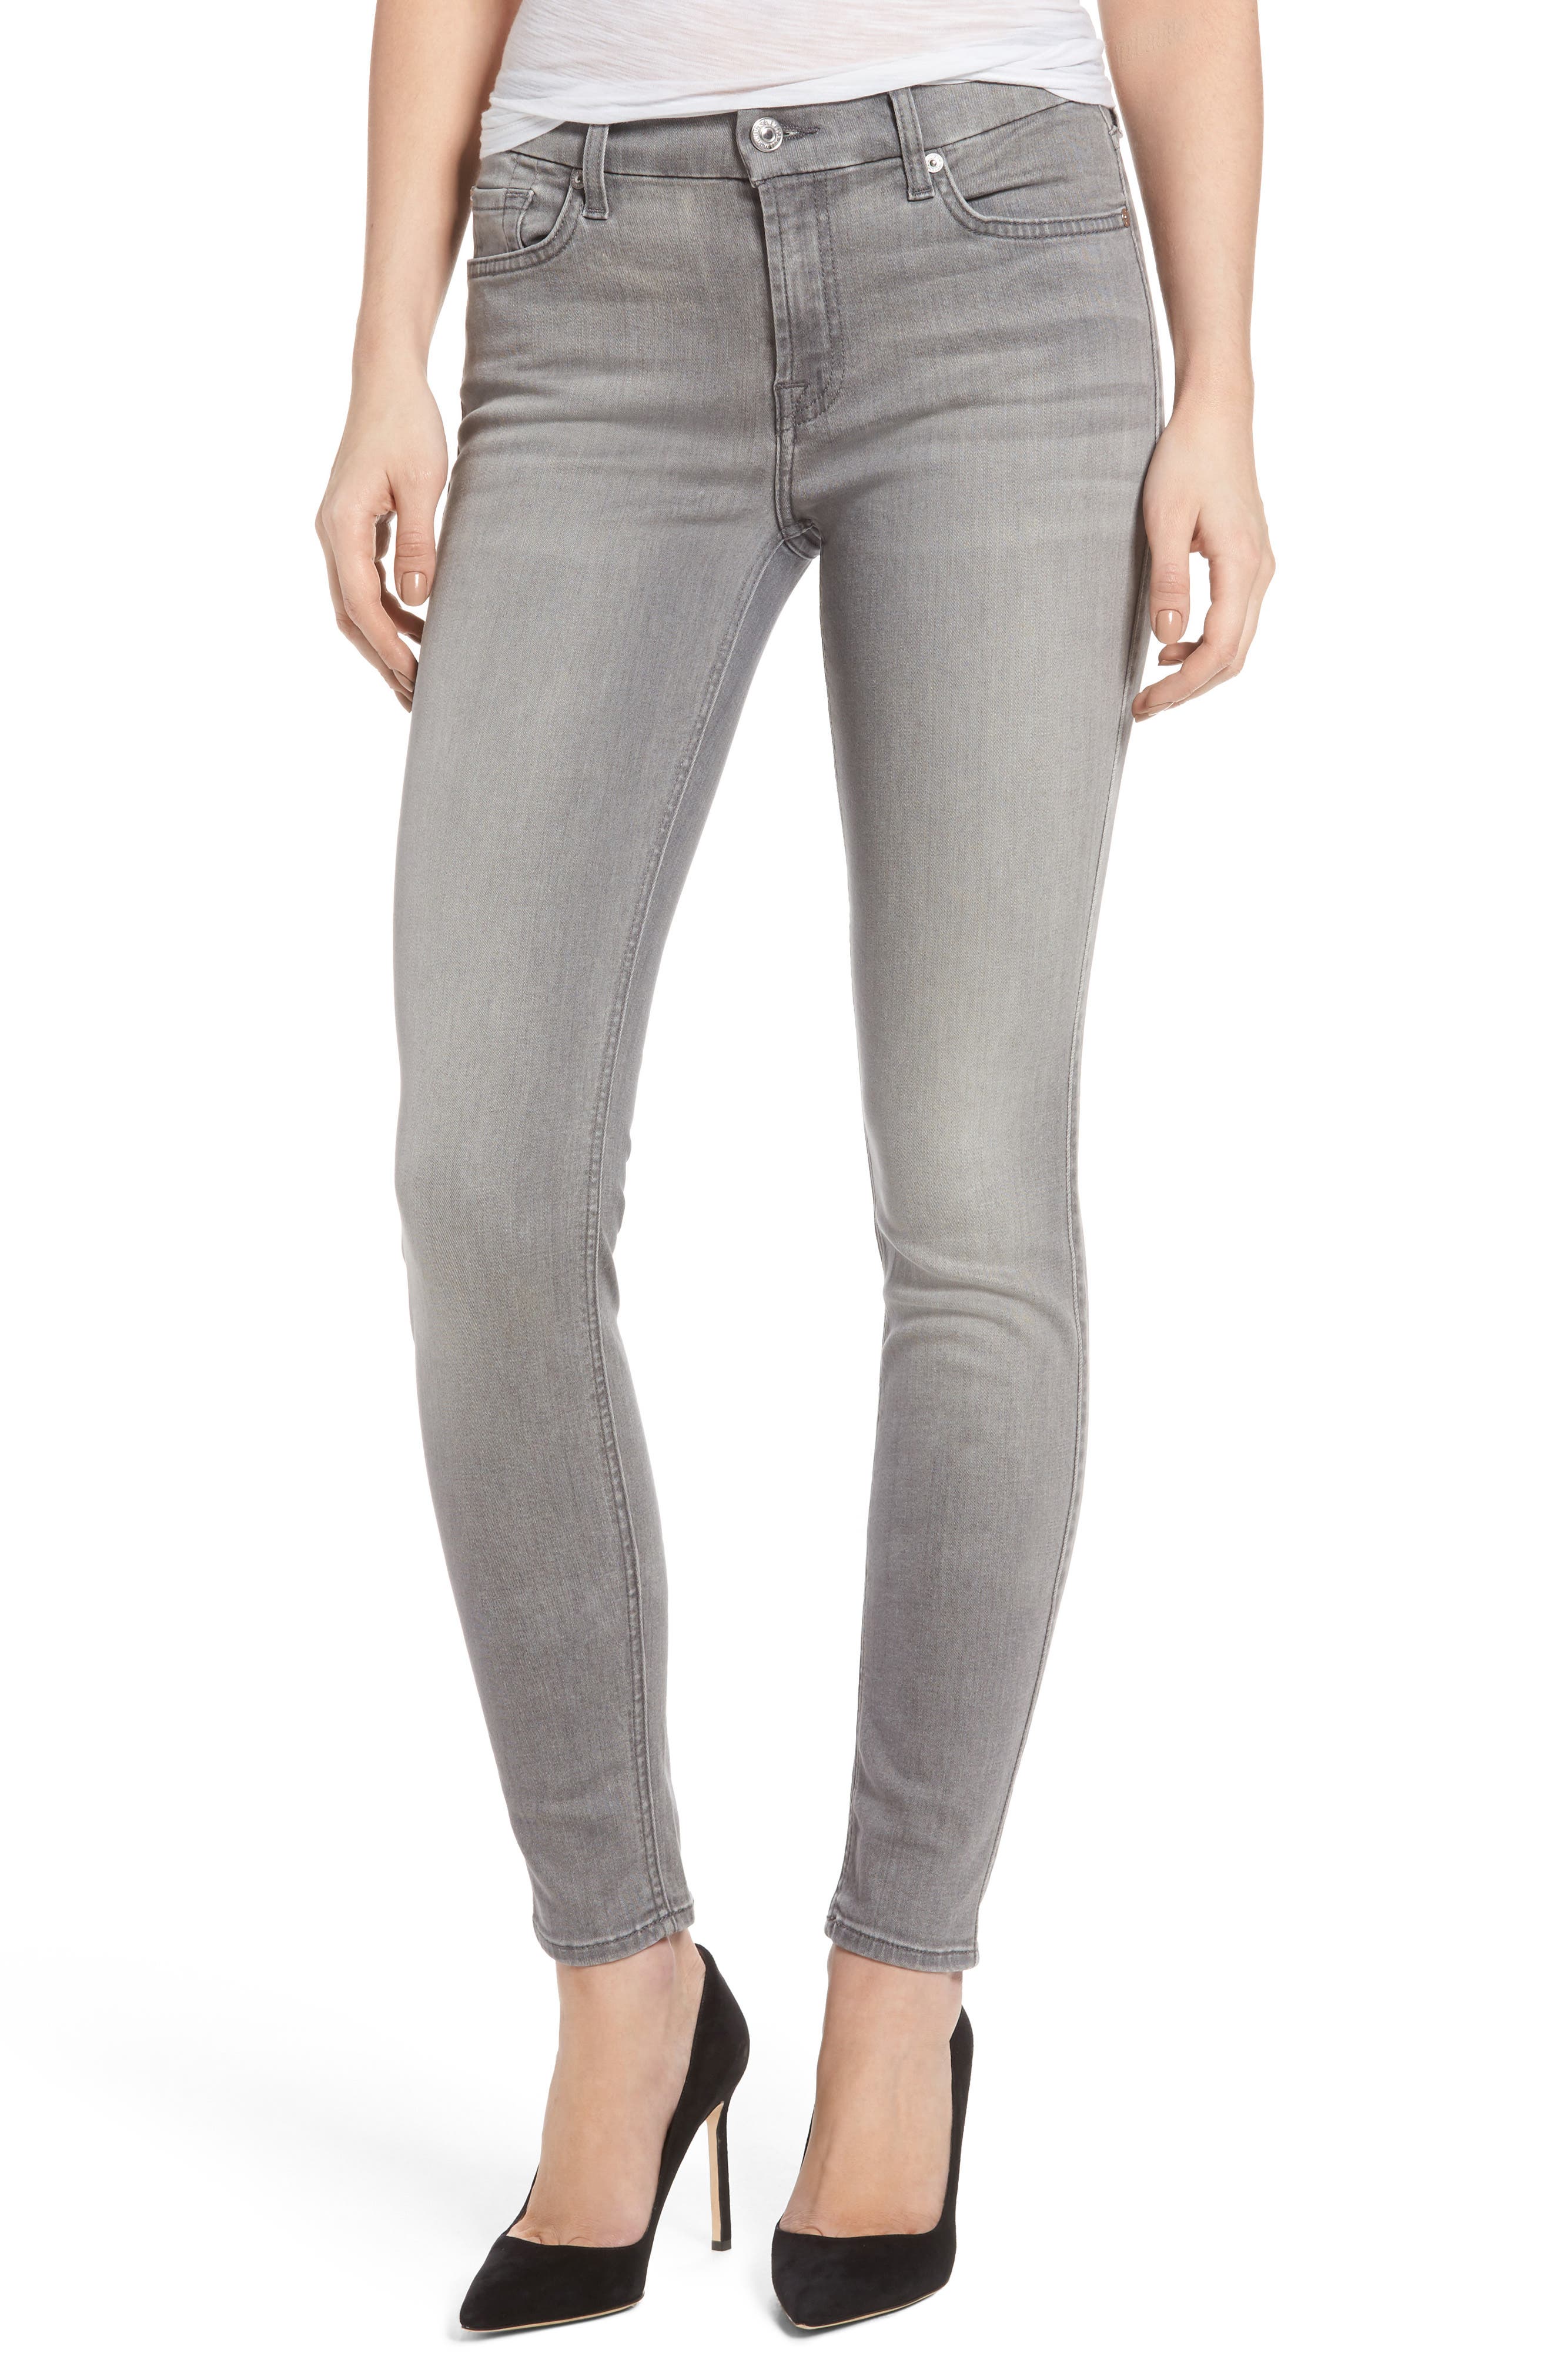 nordstrom 7 for all mankind